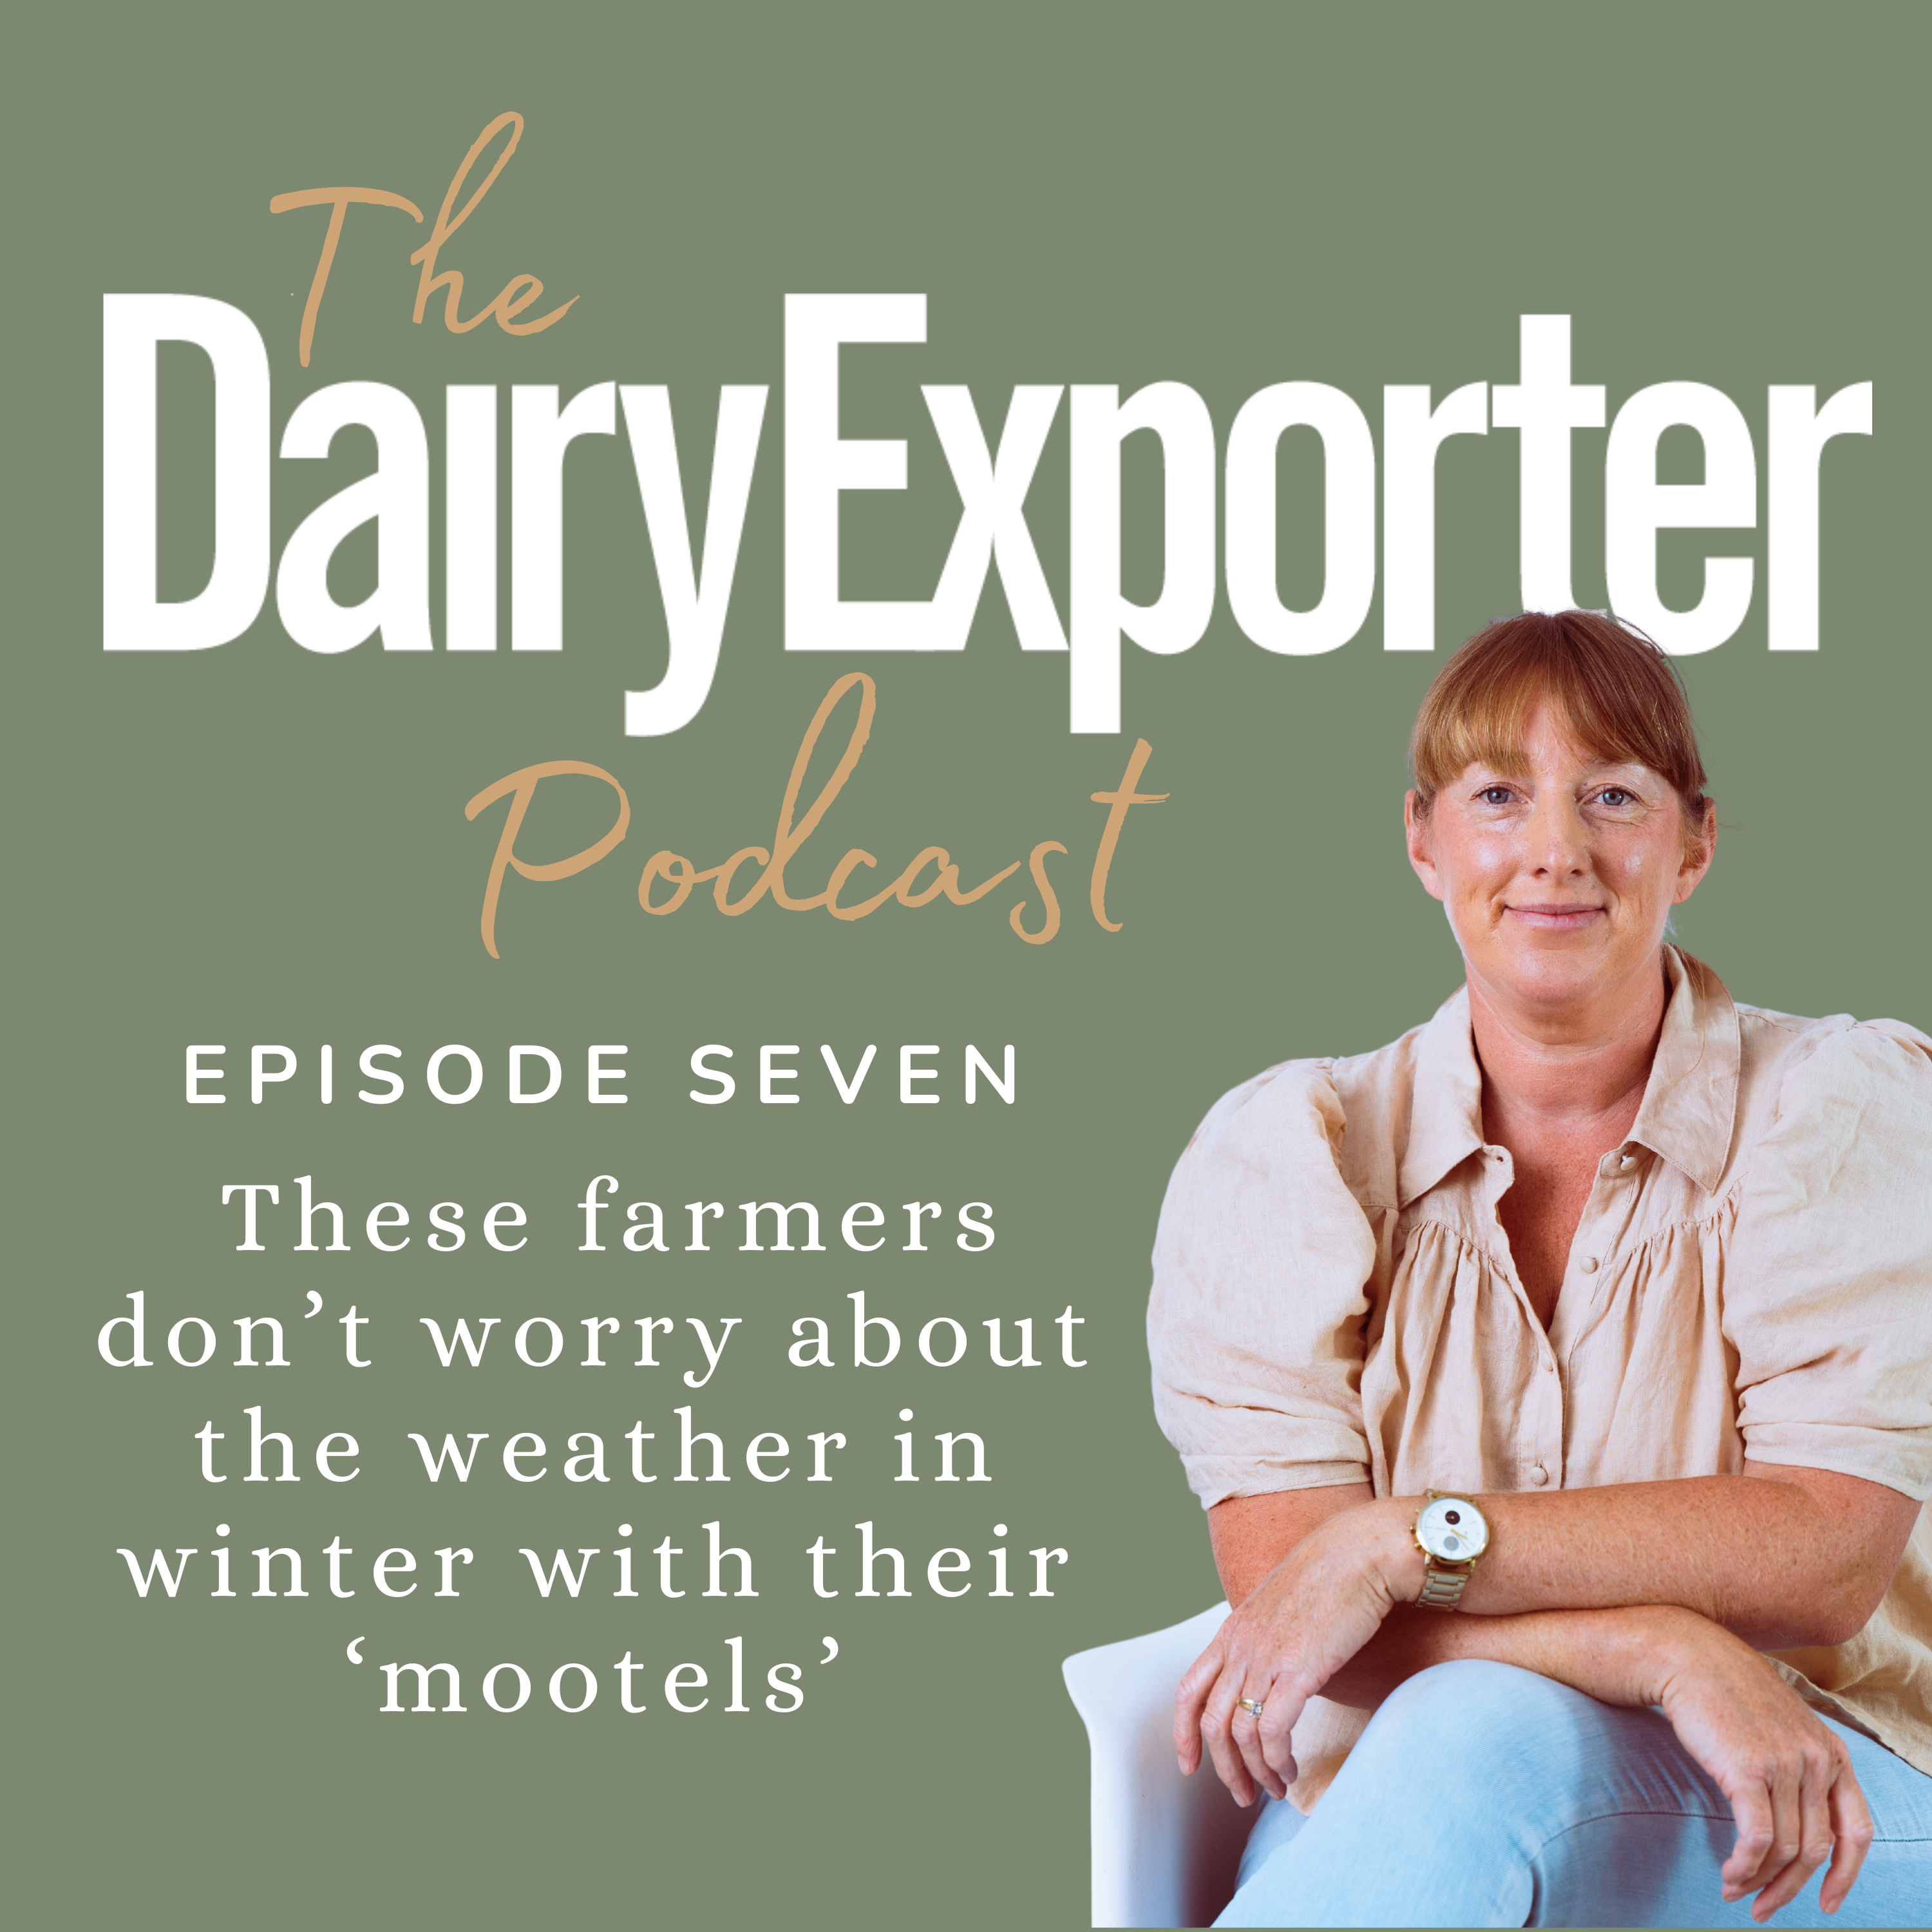 Episode 7 - These farmers don’t worry about the weather in winter with their ‘mootels’